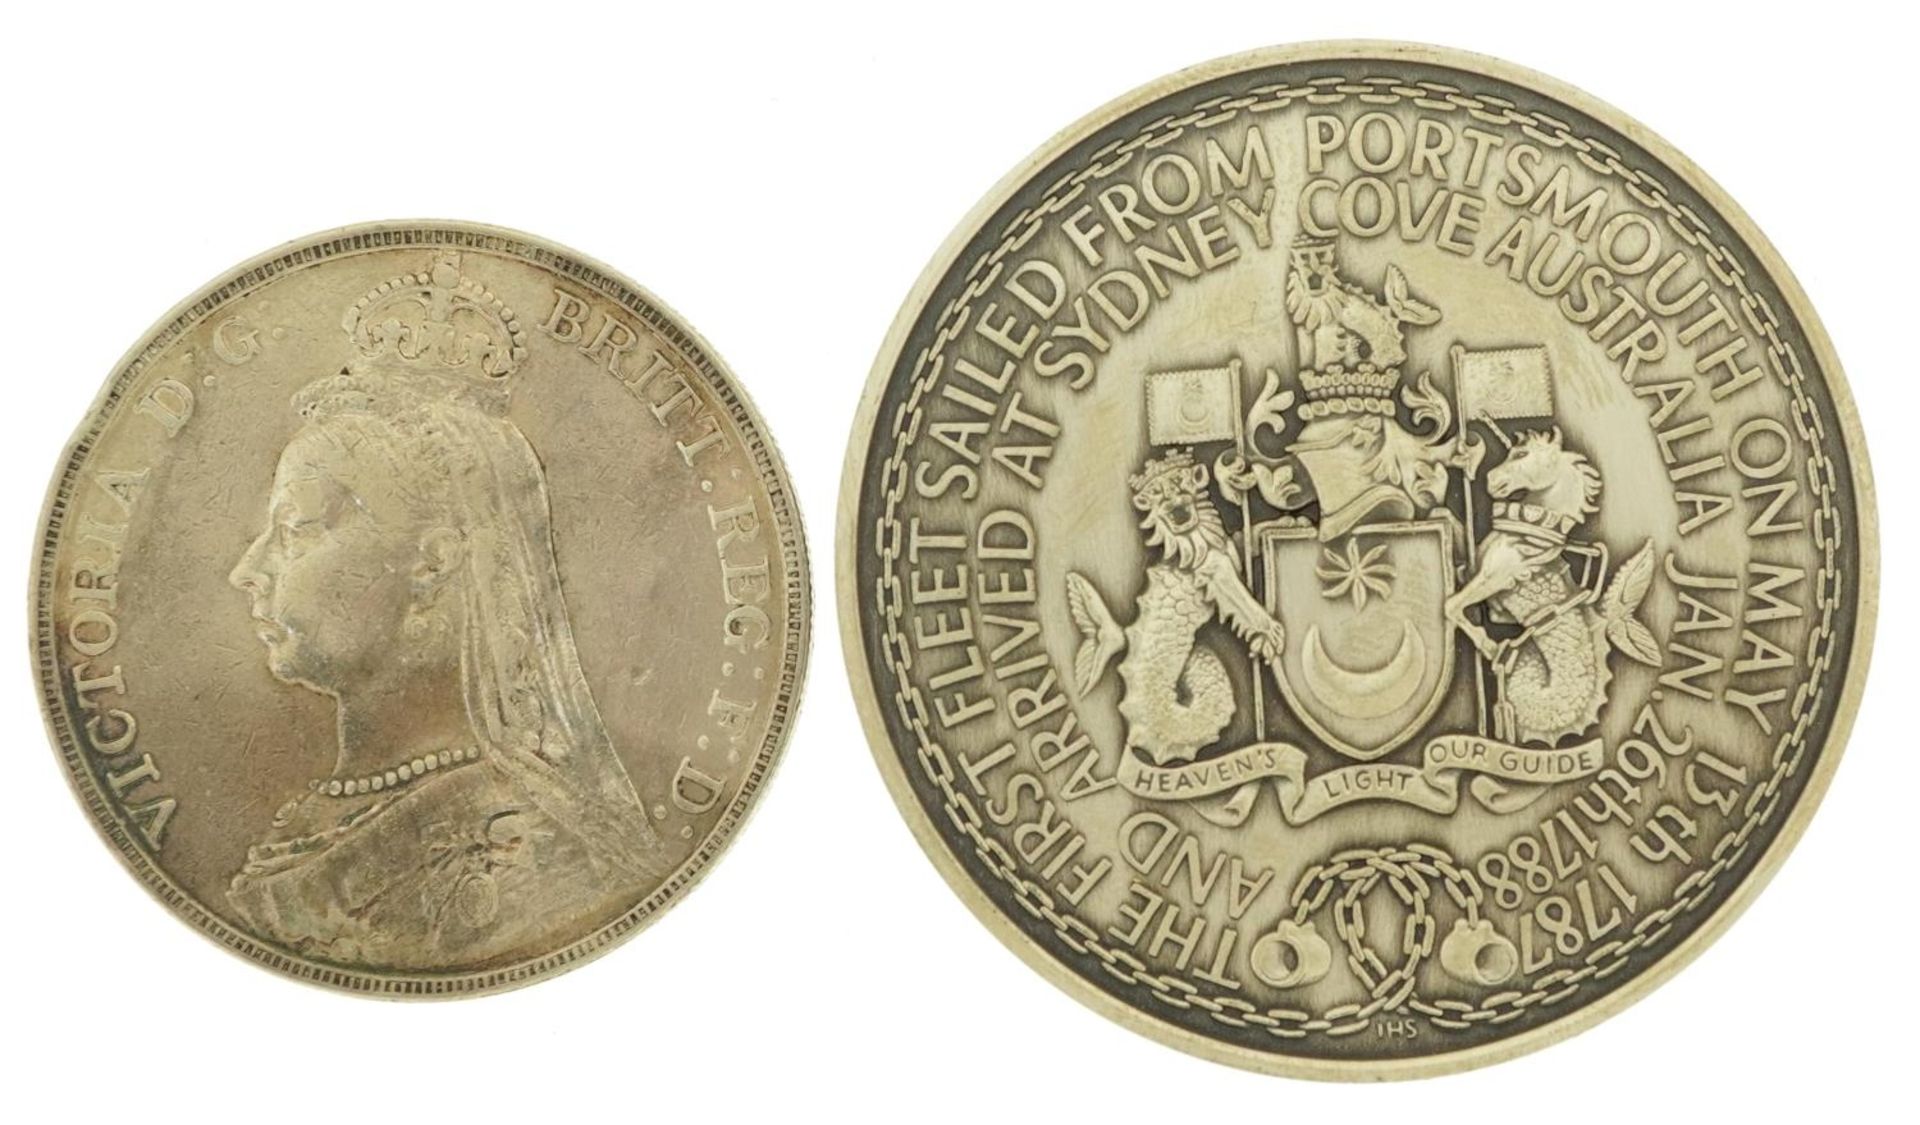 Queen Victoria 1891 silver crown and a silver medallion commemorating the Bicentennial of the - Image 3 of 6